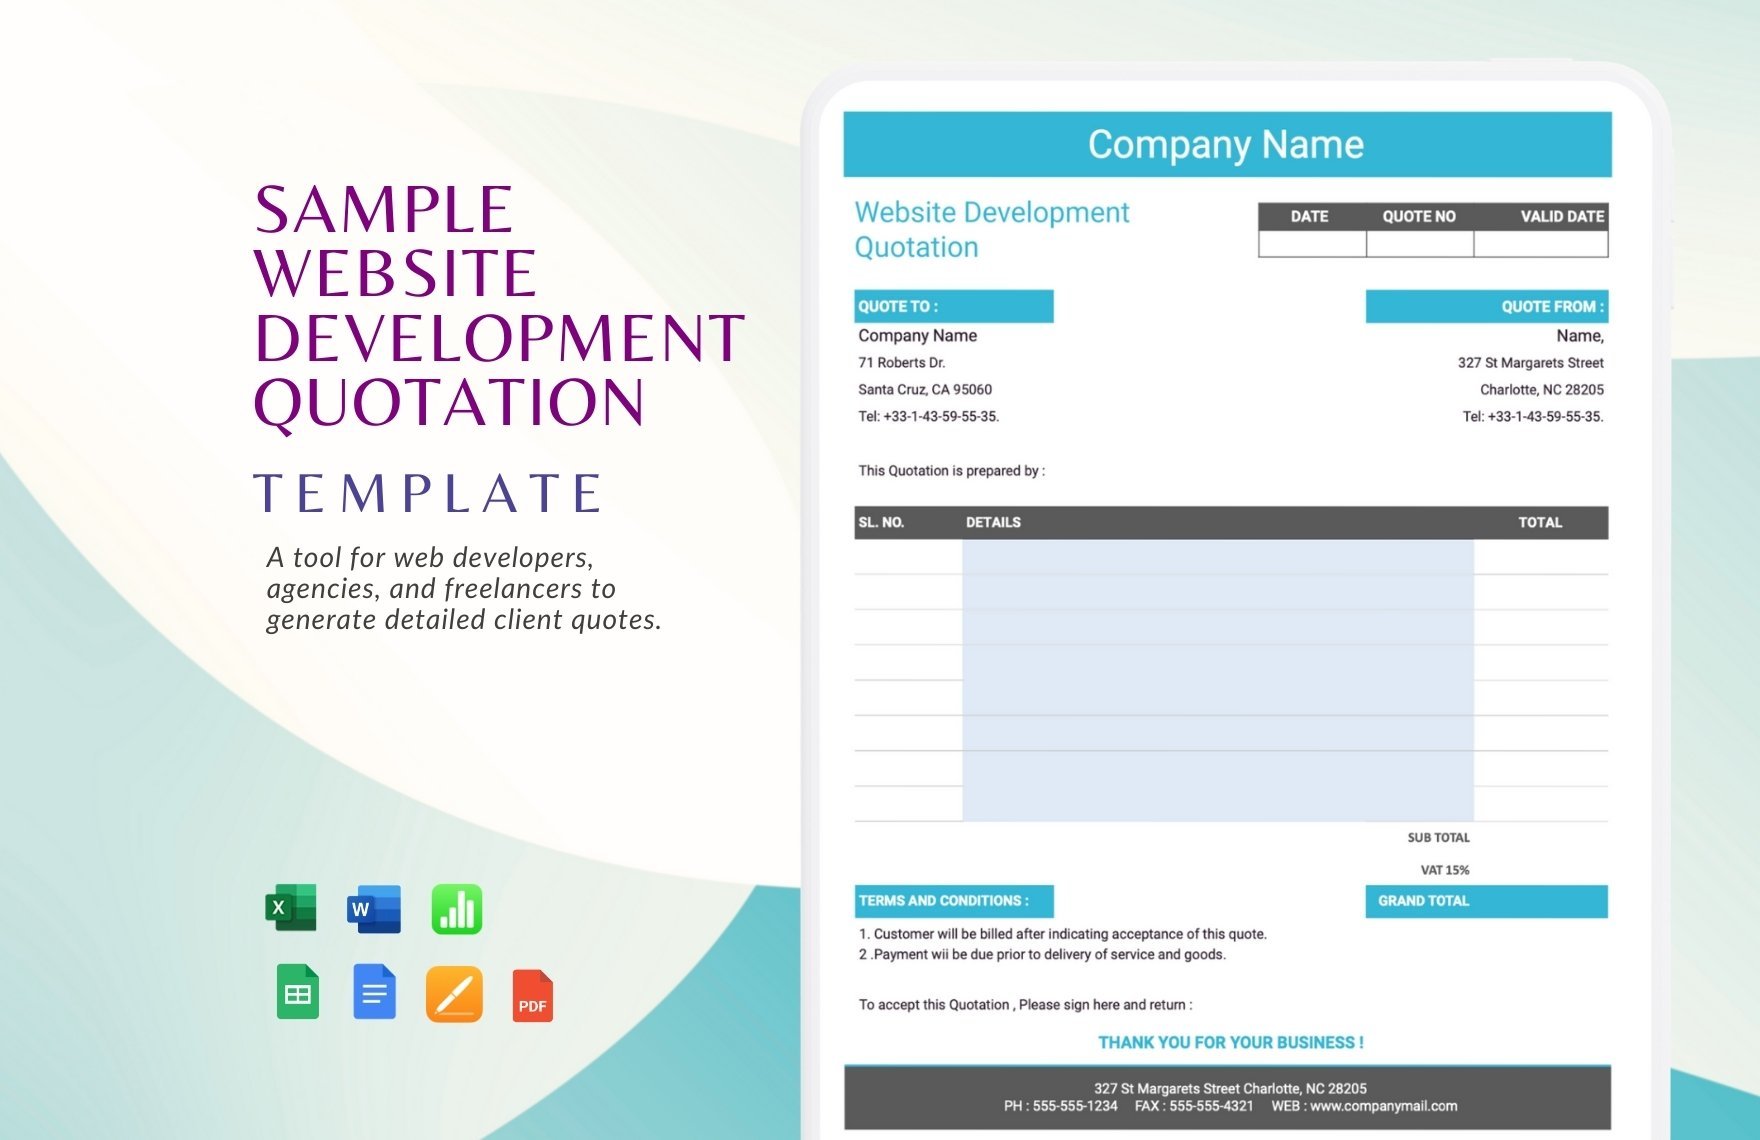 Sample Website Development Quotation Template in Word, Google Docs, Excel, PDF, Google Sheets, Apple Pages, Apple Numbers